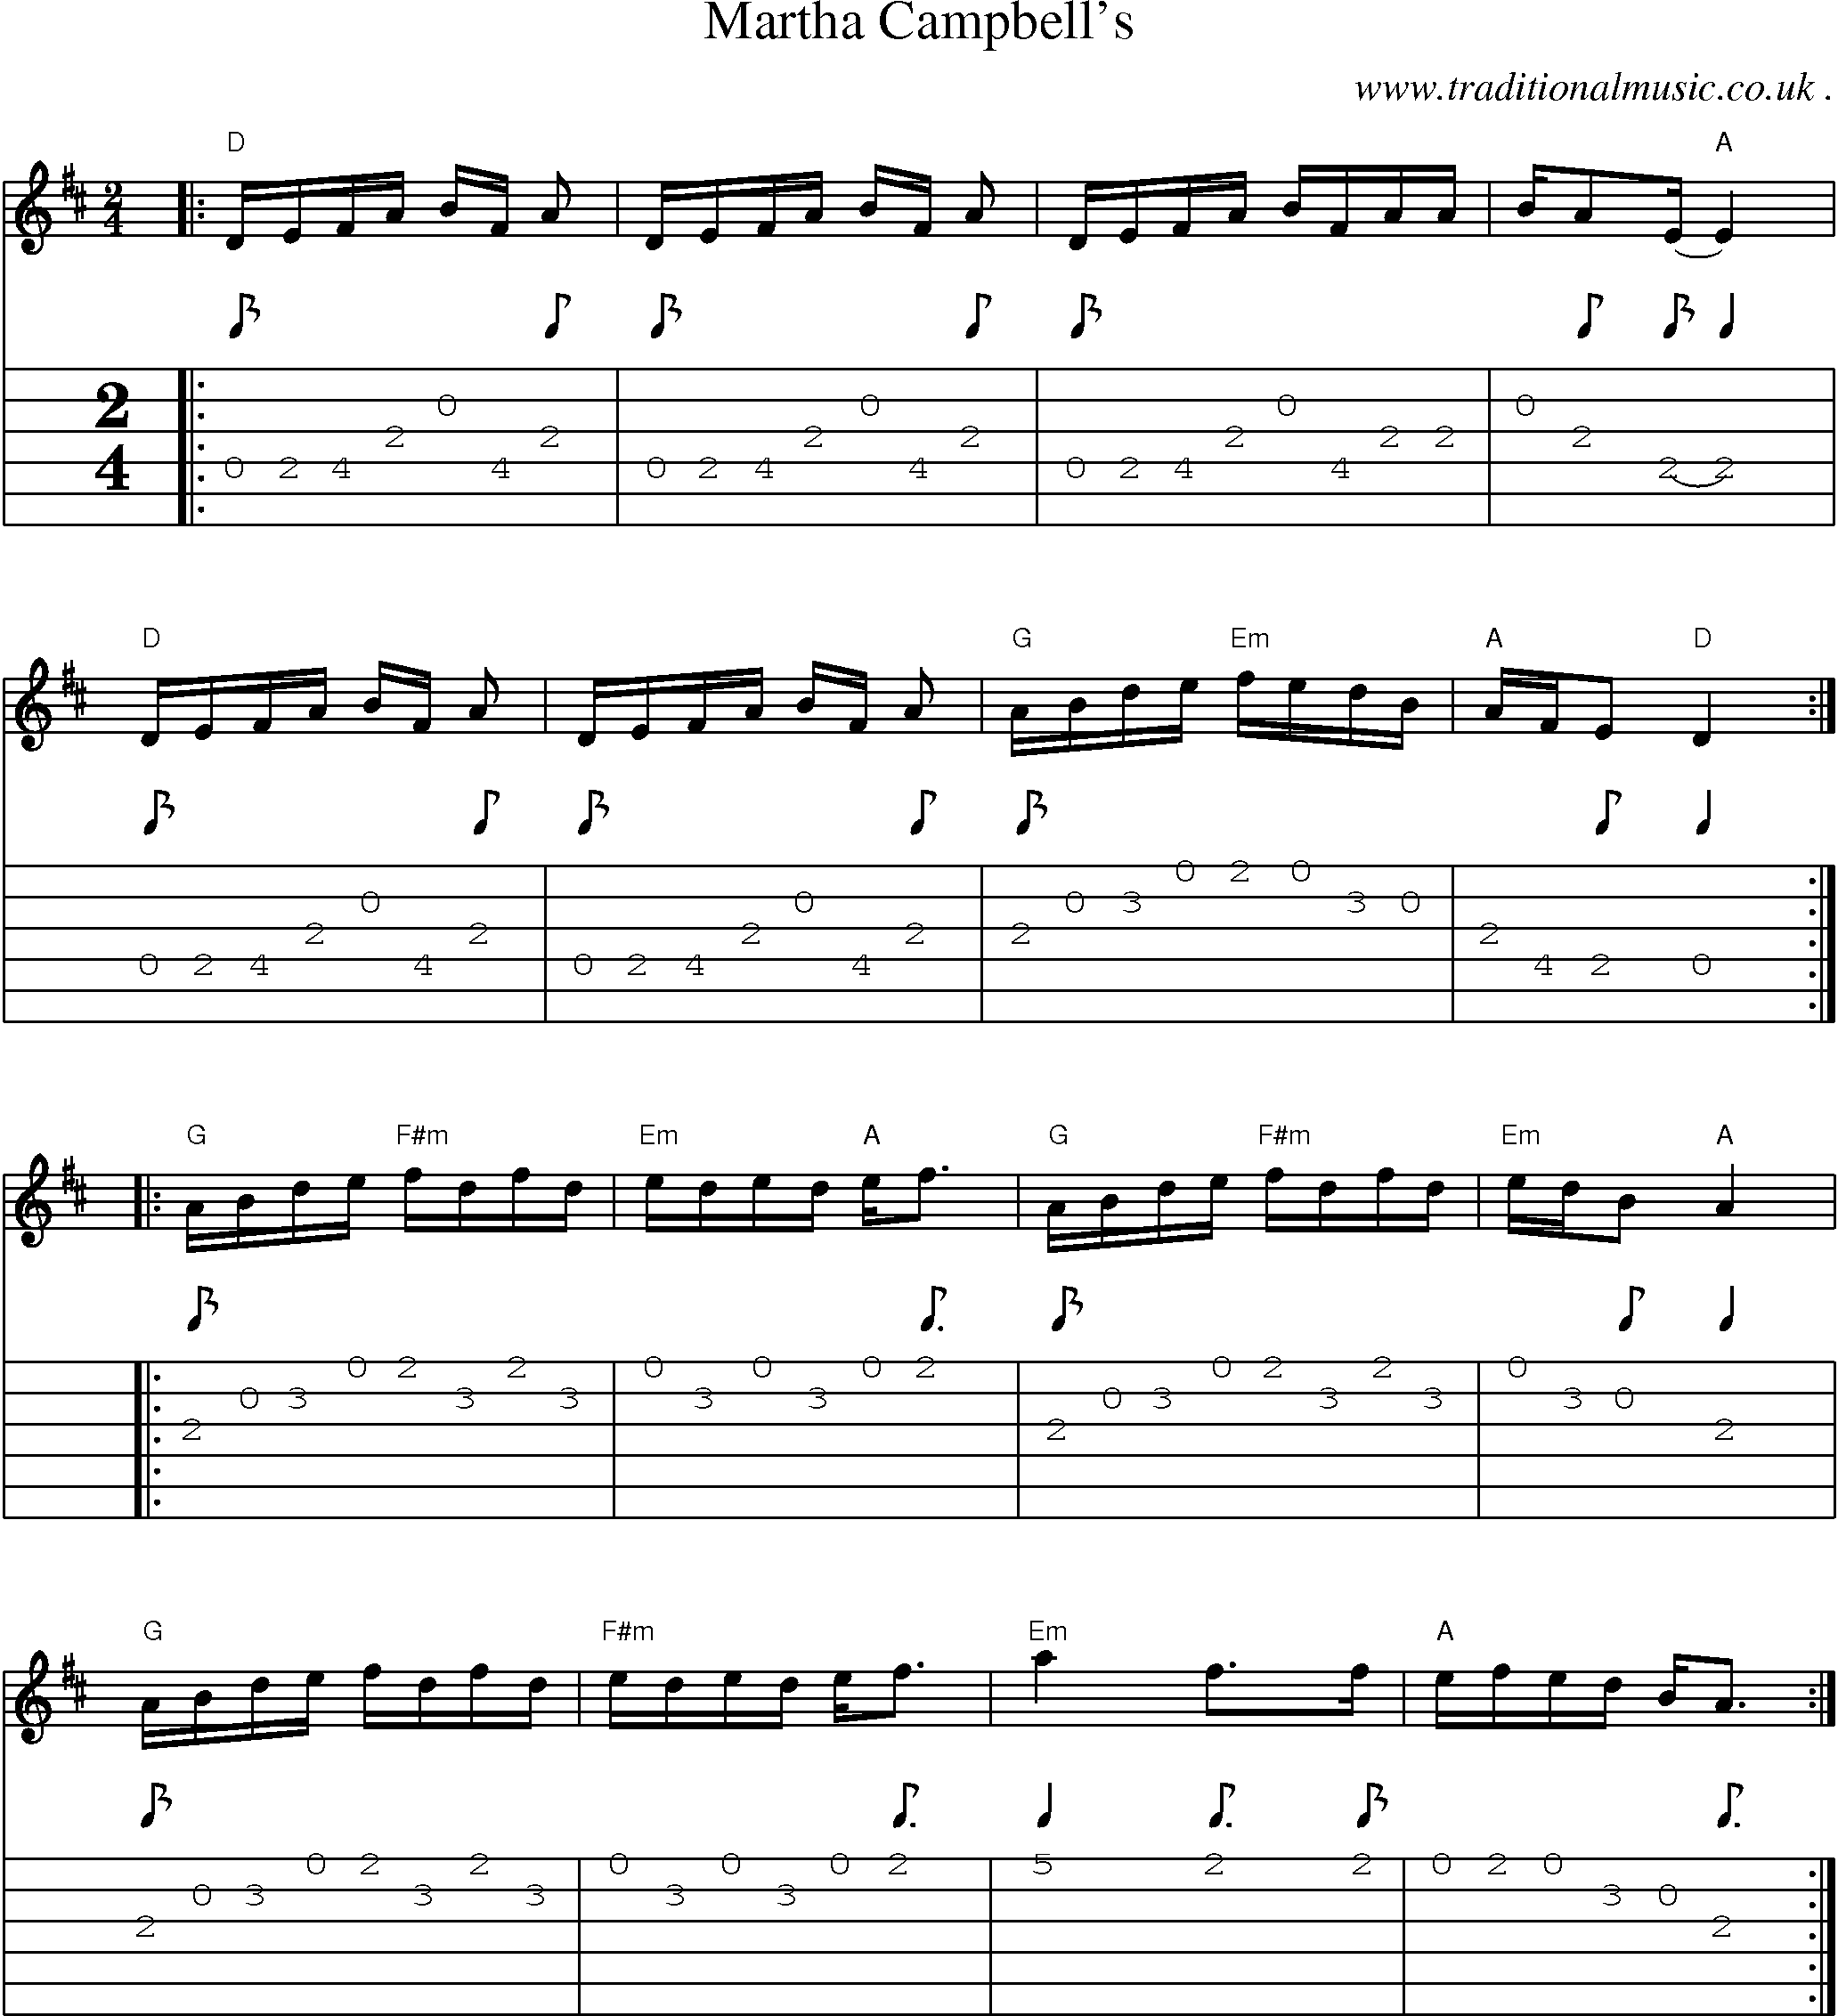 Music Score and Guitar Tabs for Martha Campbells